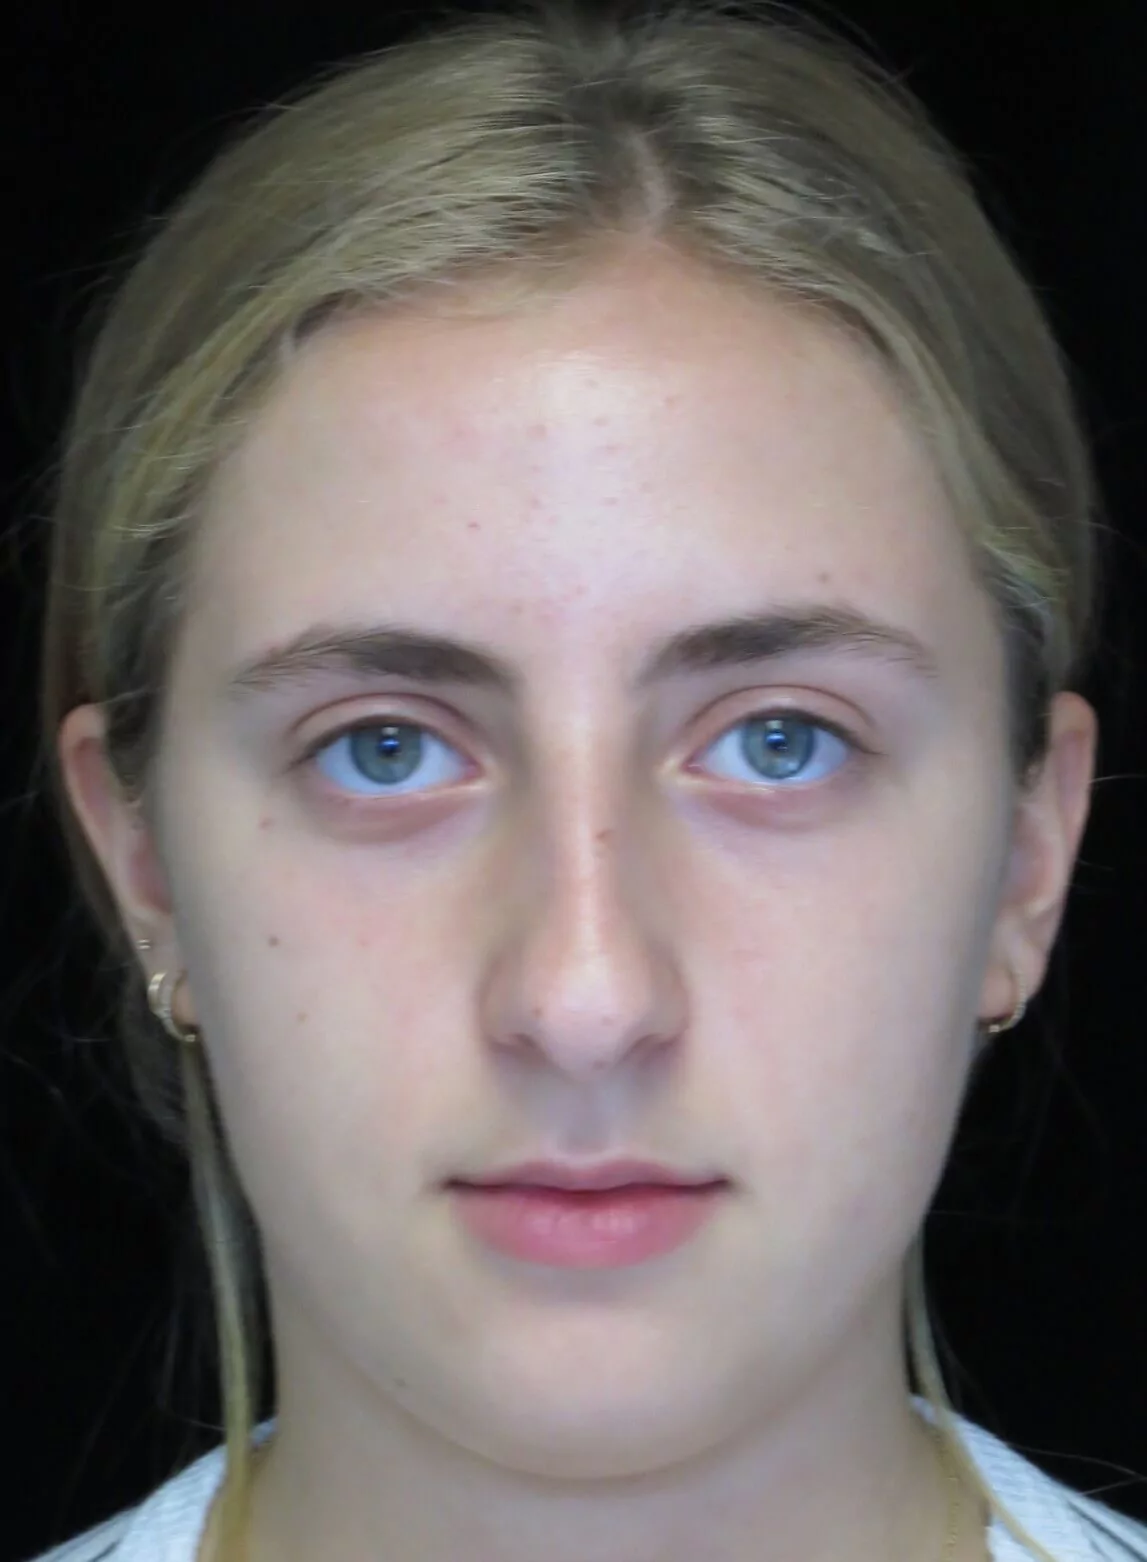 before and after photo on a frontal view of a non-smiling teenage female patient who underwent scarless rhinoplasty